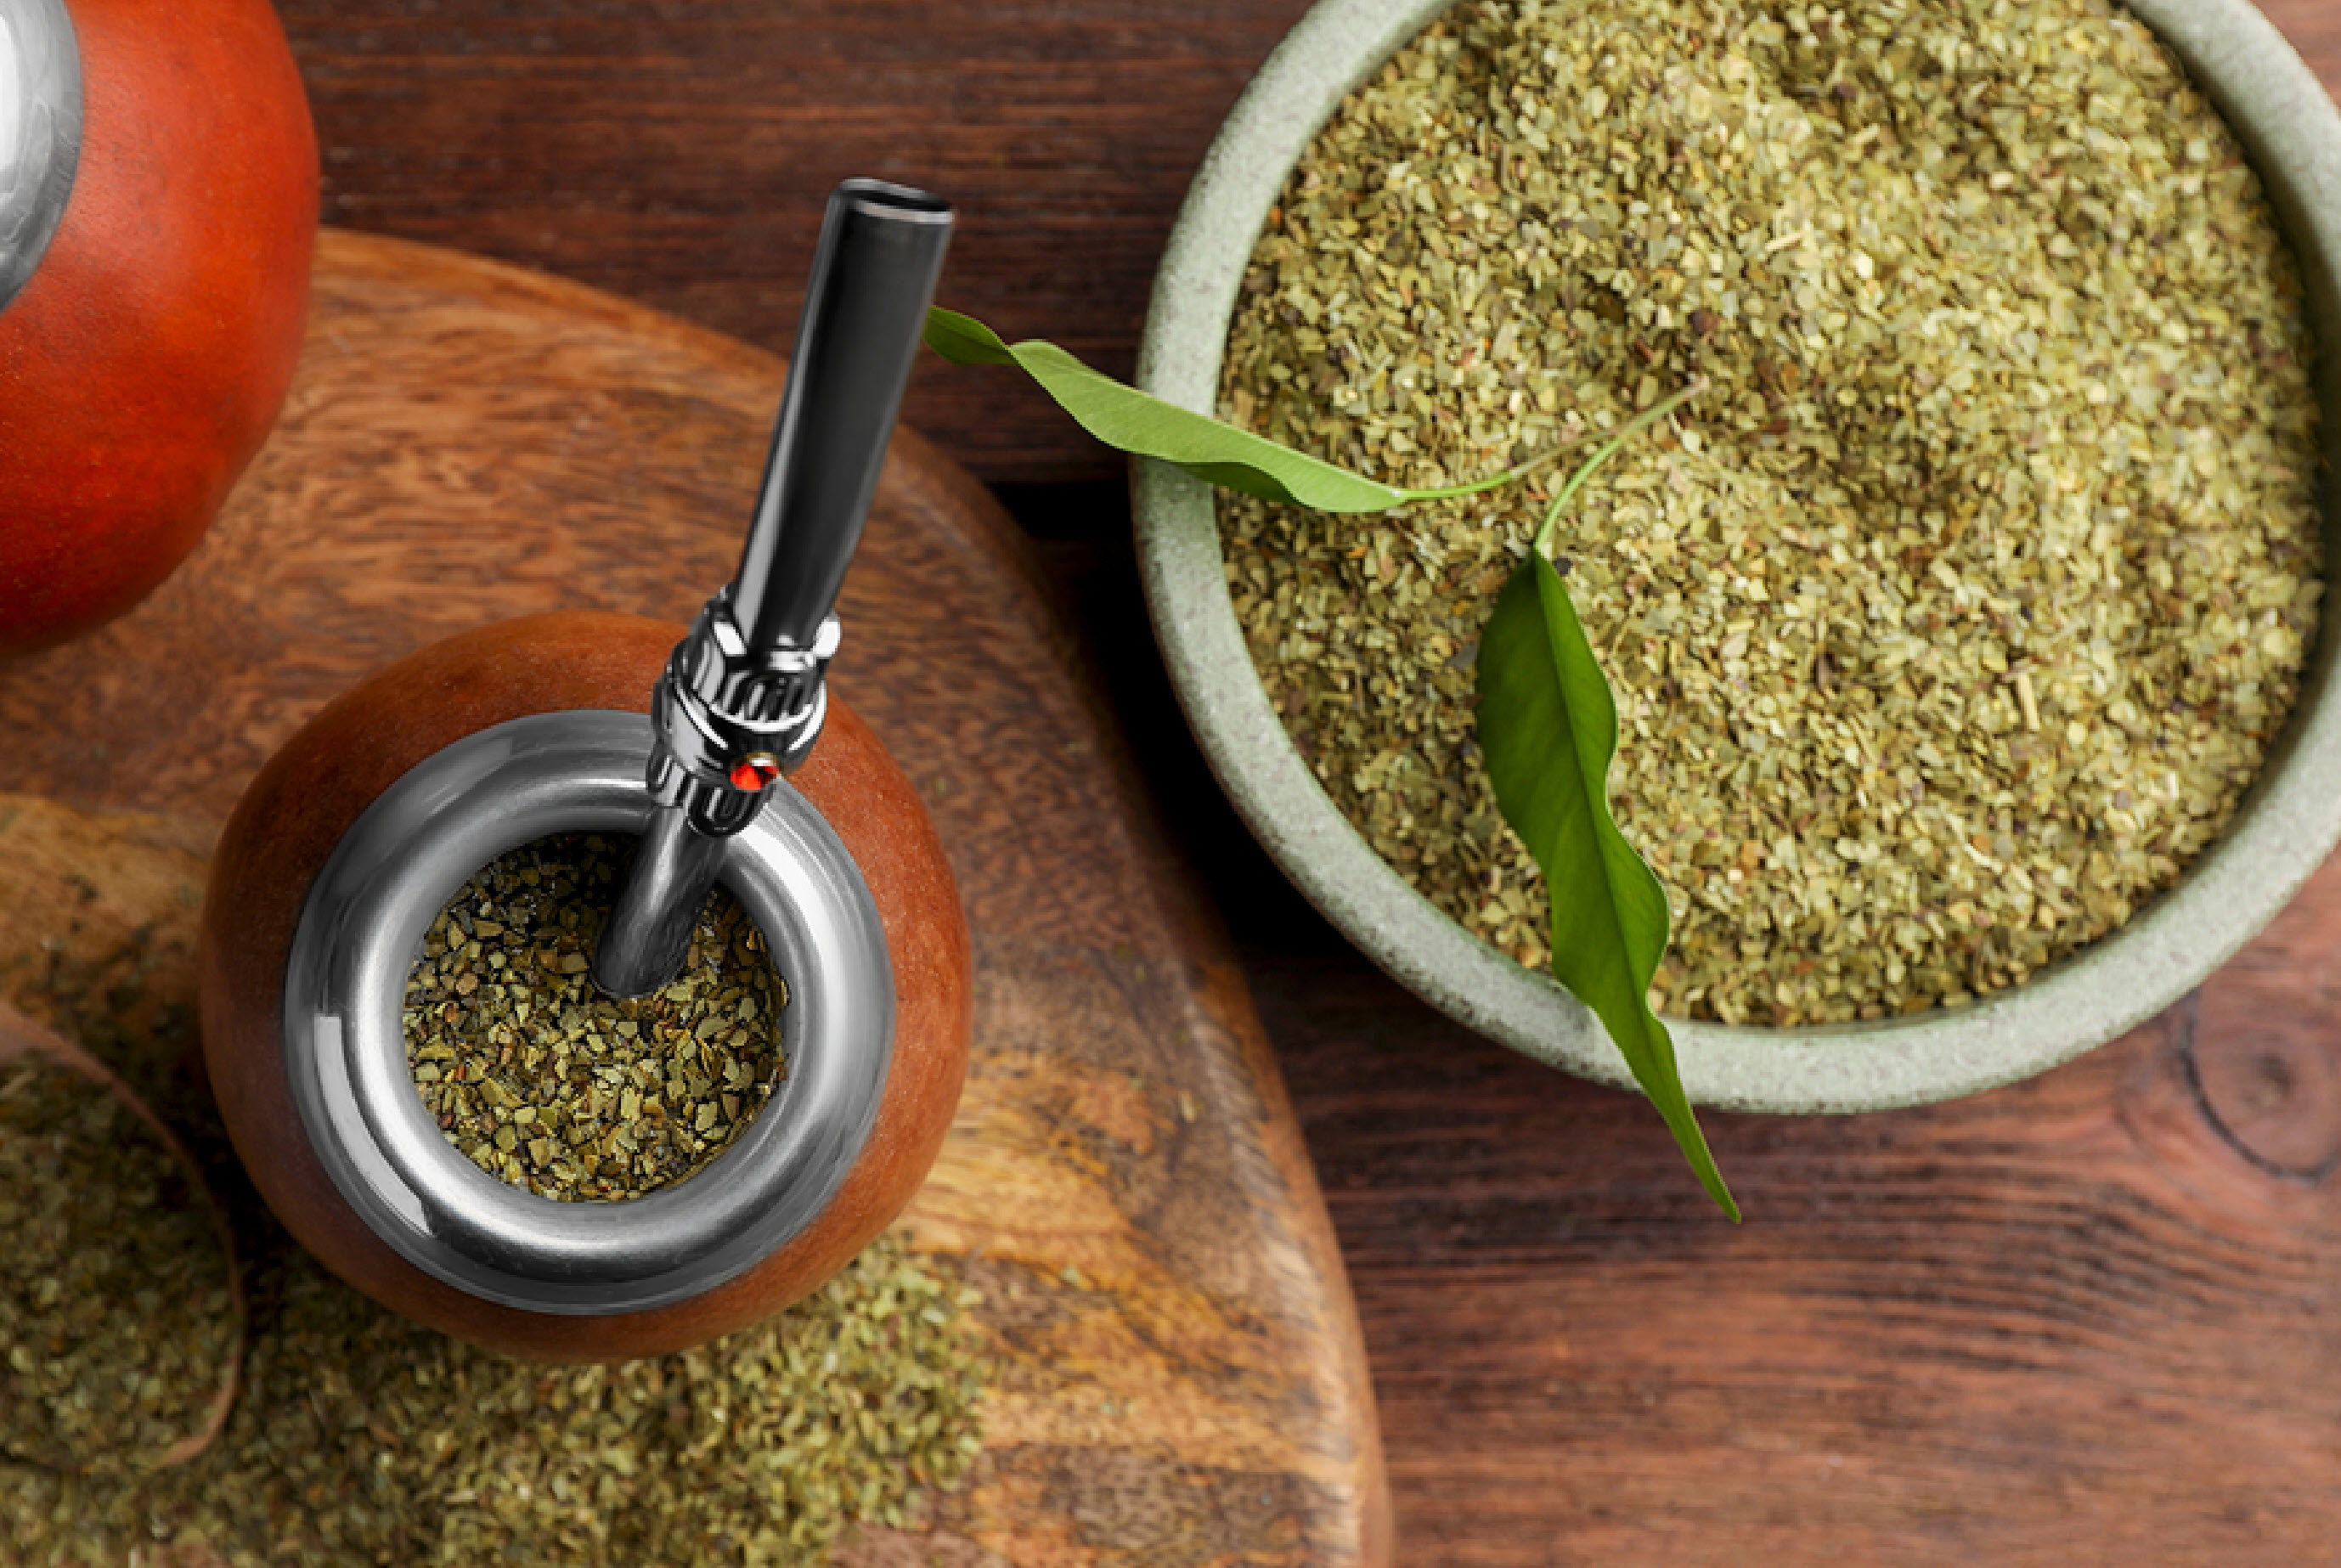 Yerba Mate Market and Consumer Demand Is on The Rise, According to, yerba  mate 